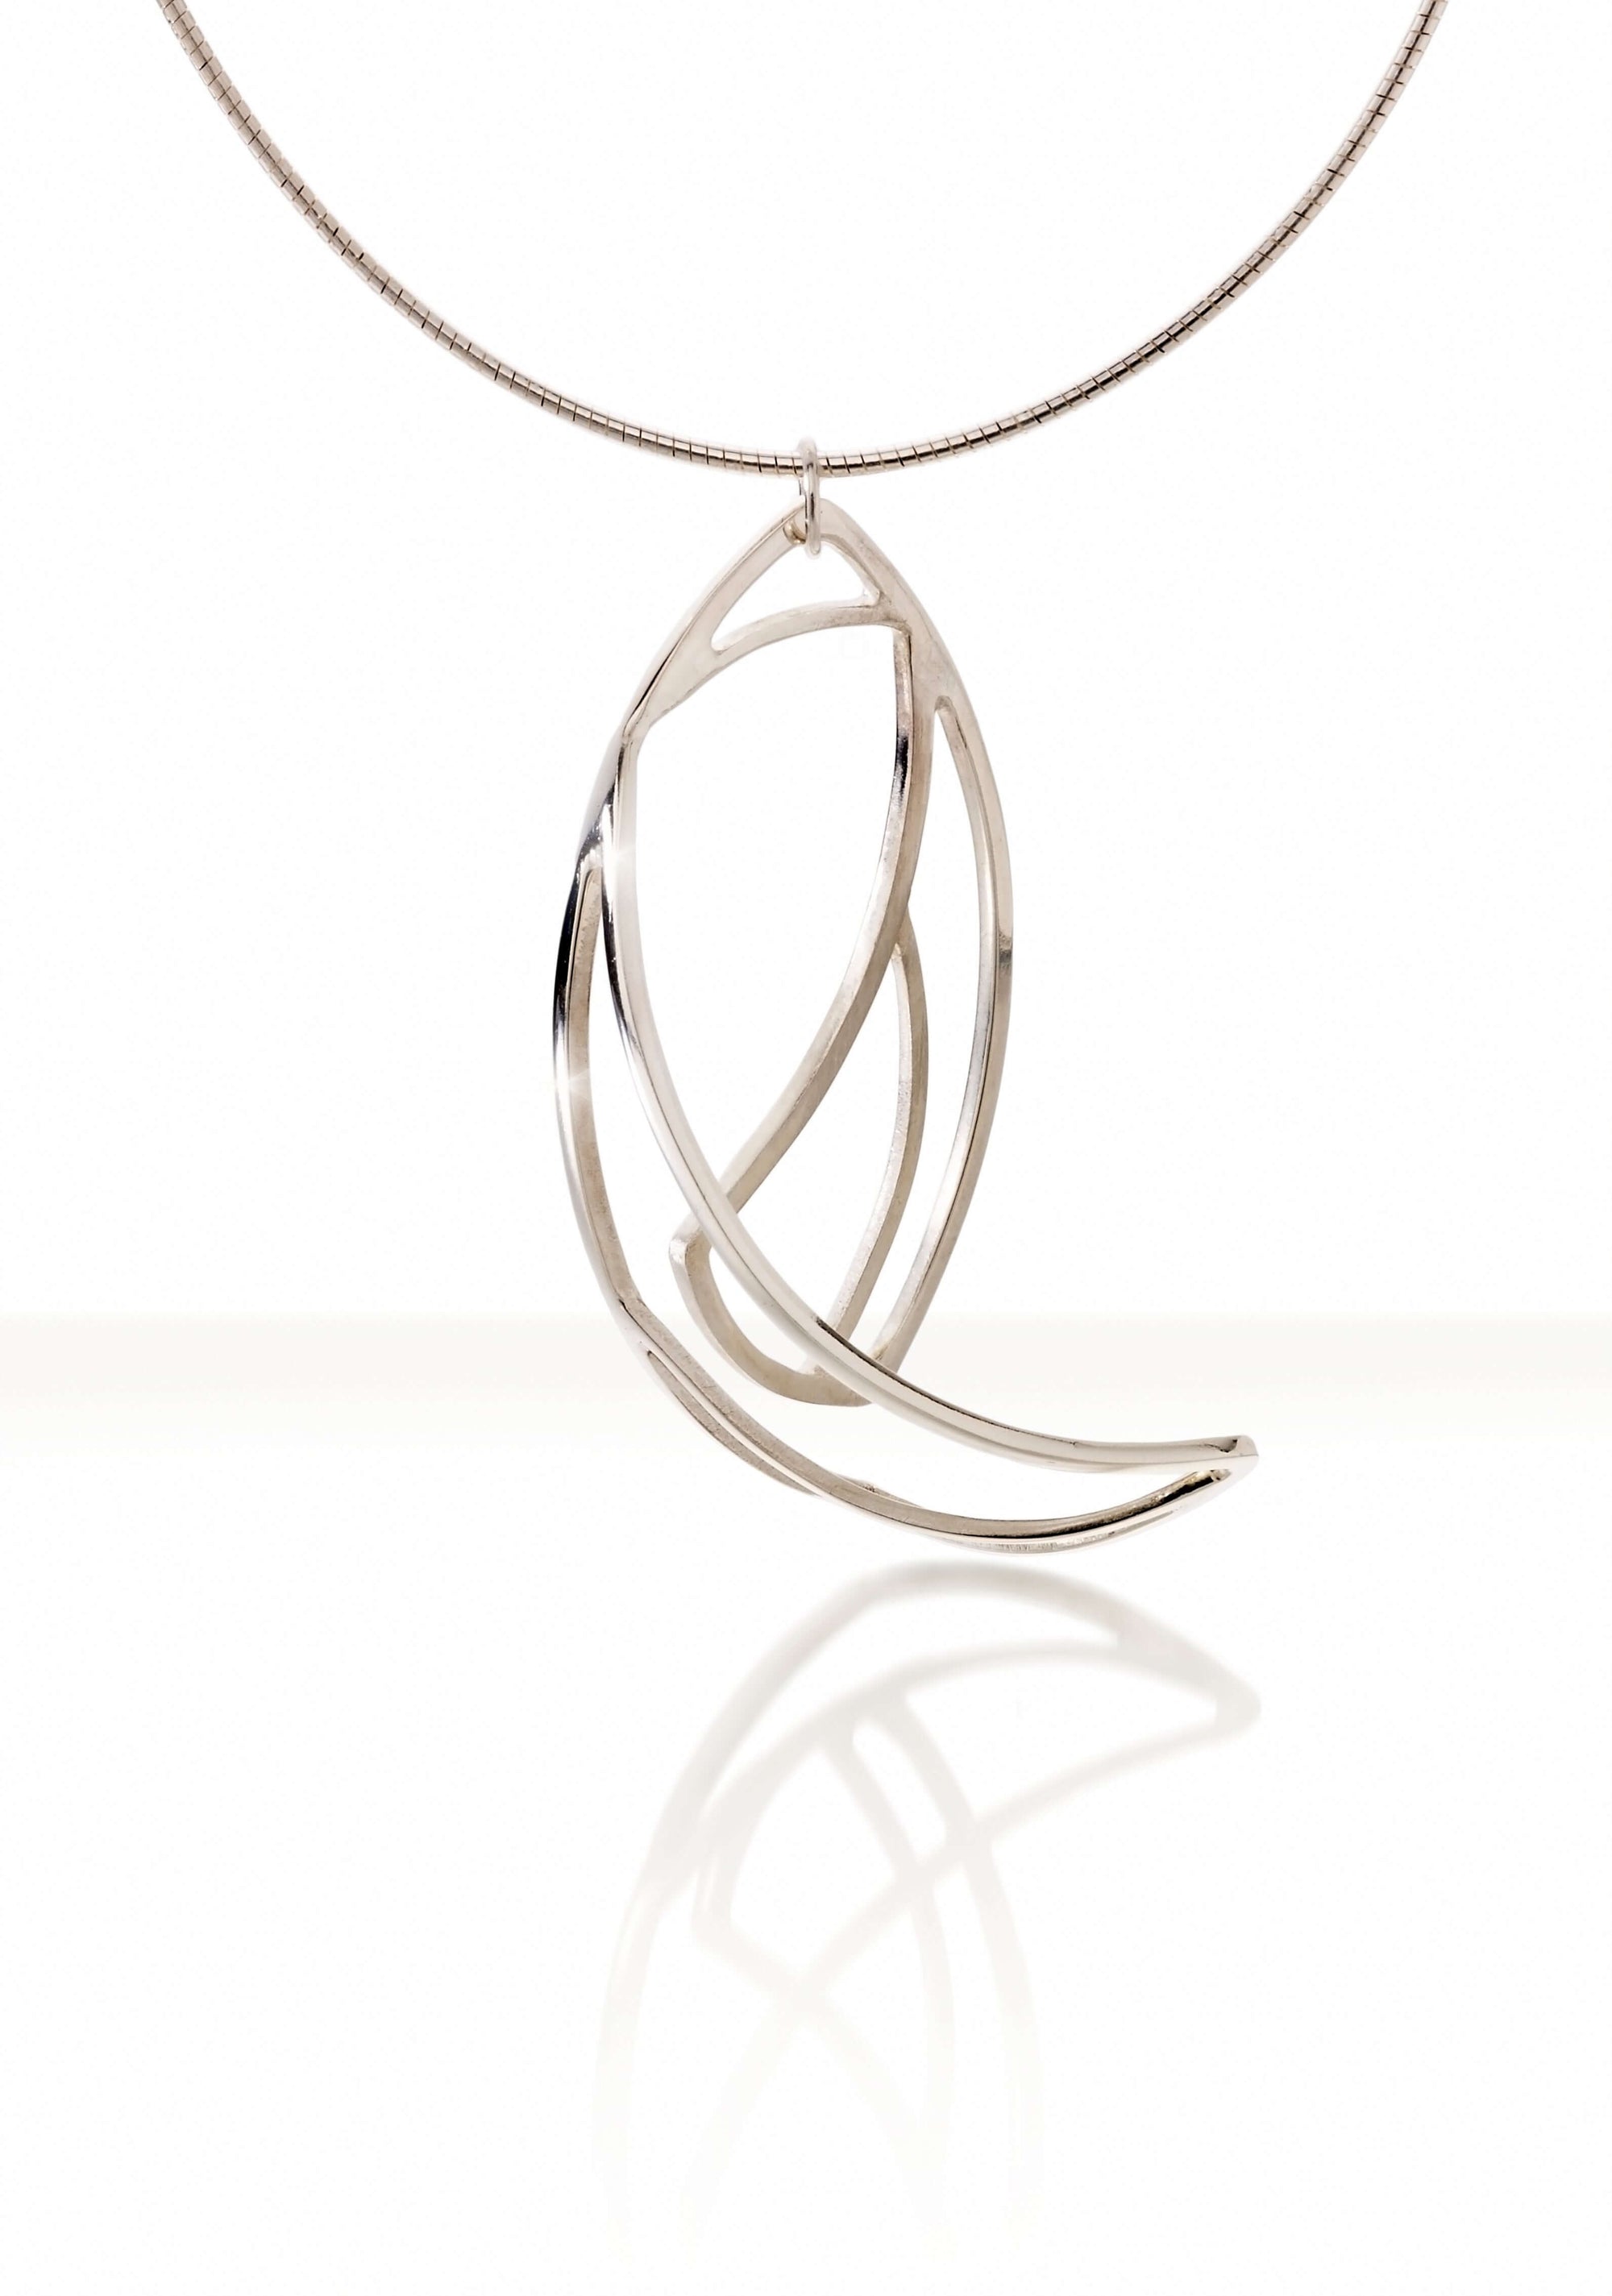 A sterling silver abstract pendant necklace on silver chain